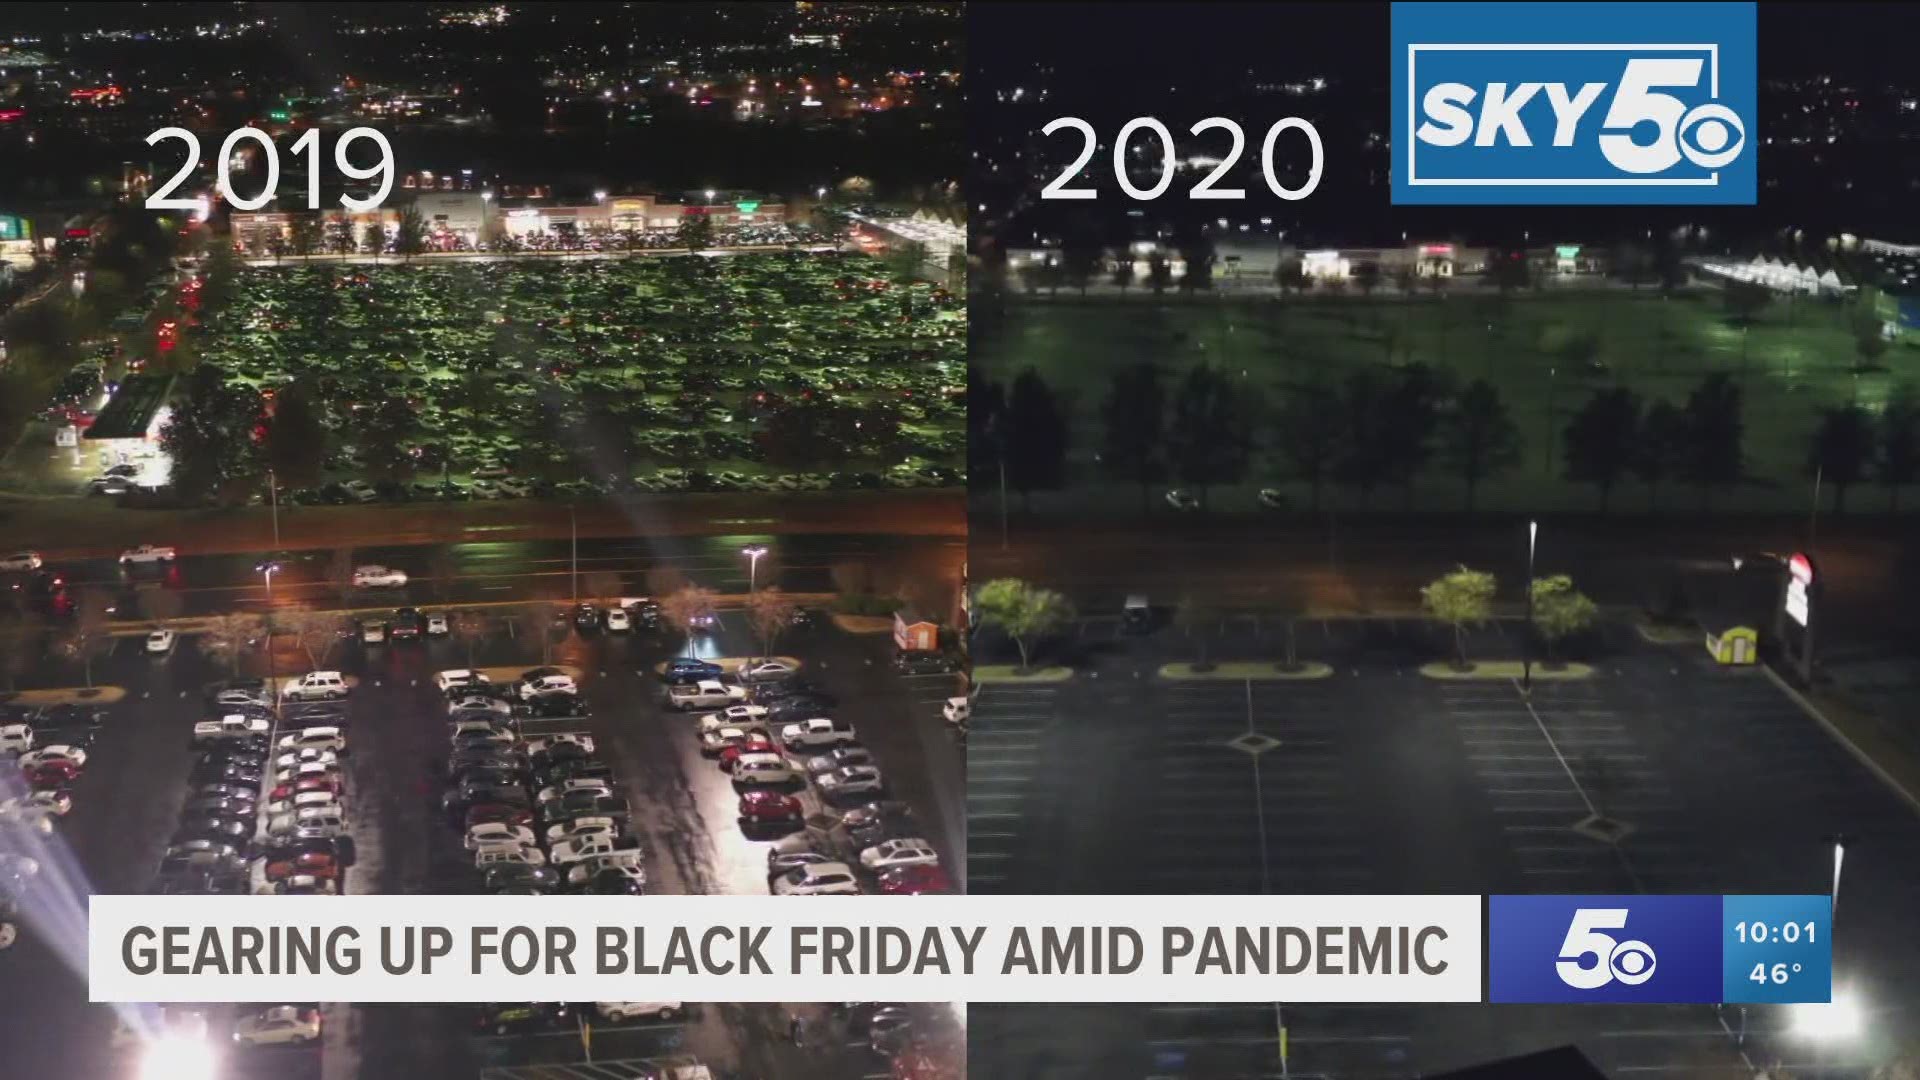 Black Friday eve looks drastically different in 2020.